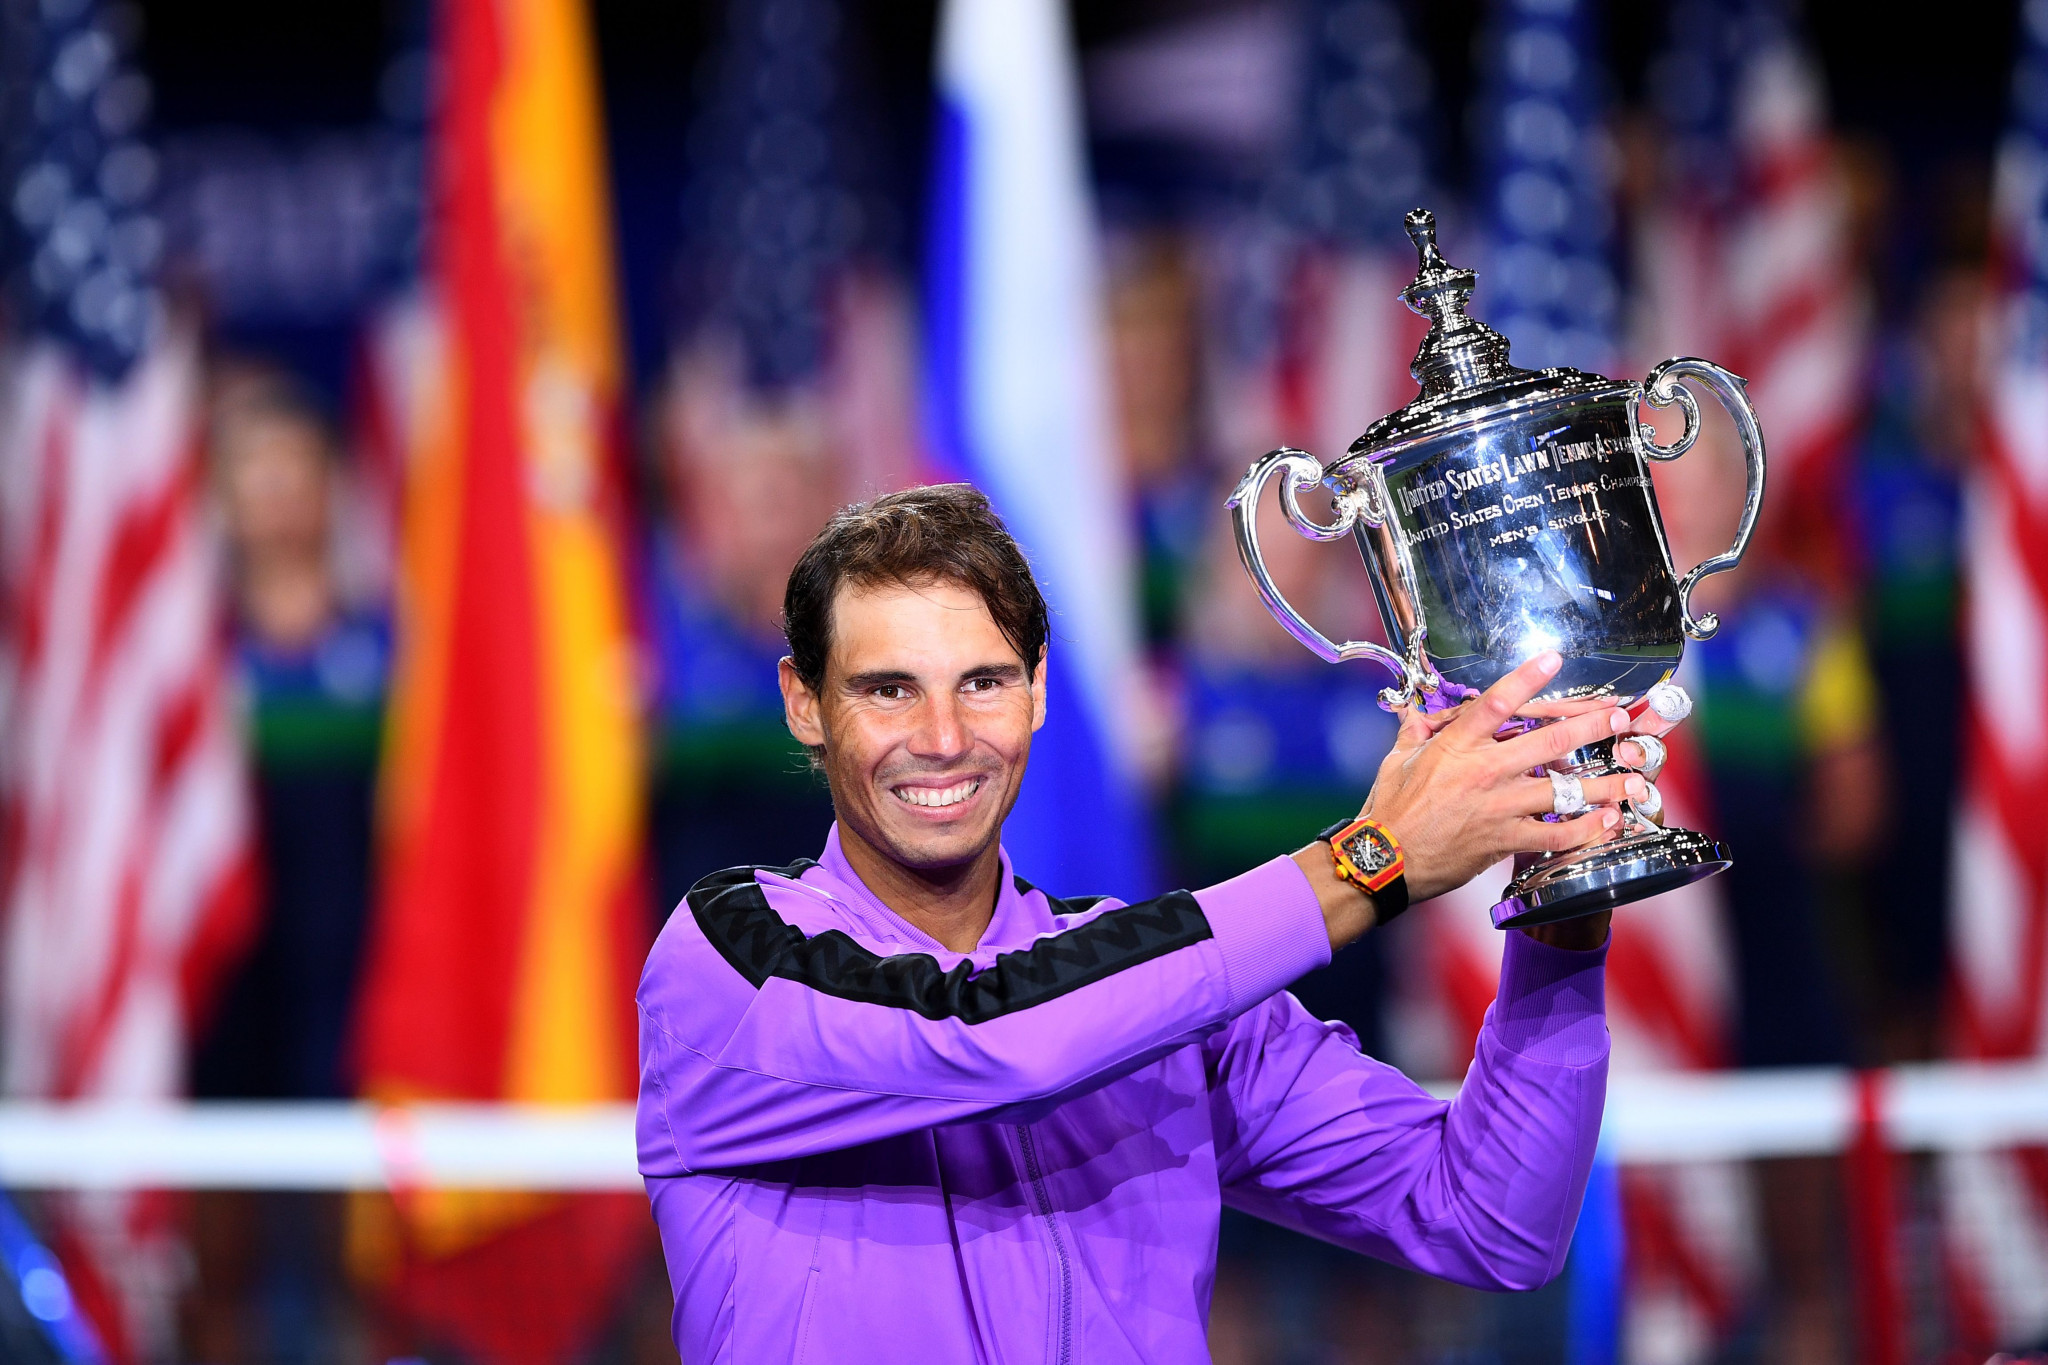 Rafael Nadal won his fourth US Open title after holding off the comeback of Russia's Daniil Medvedev ©Getty Images